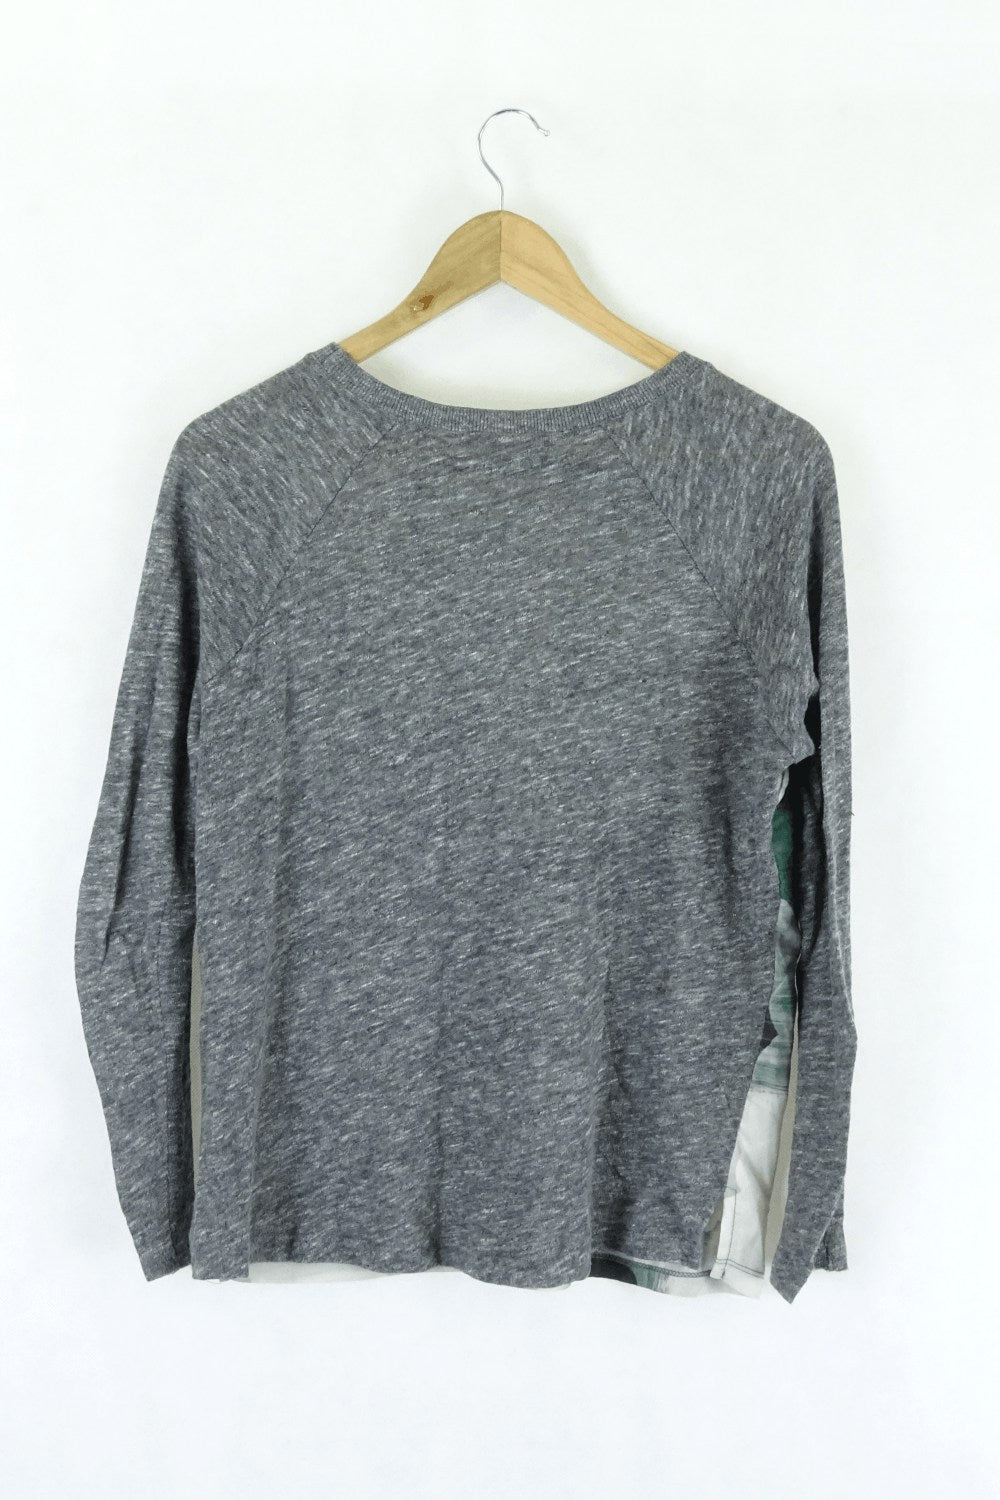 Zara Grey and Green Knit Top S